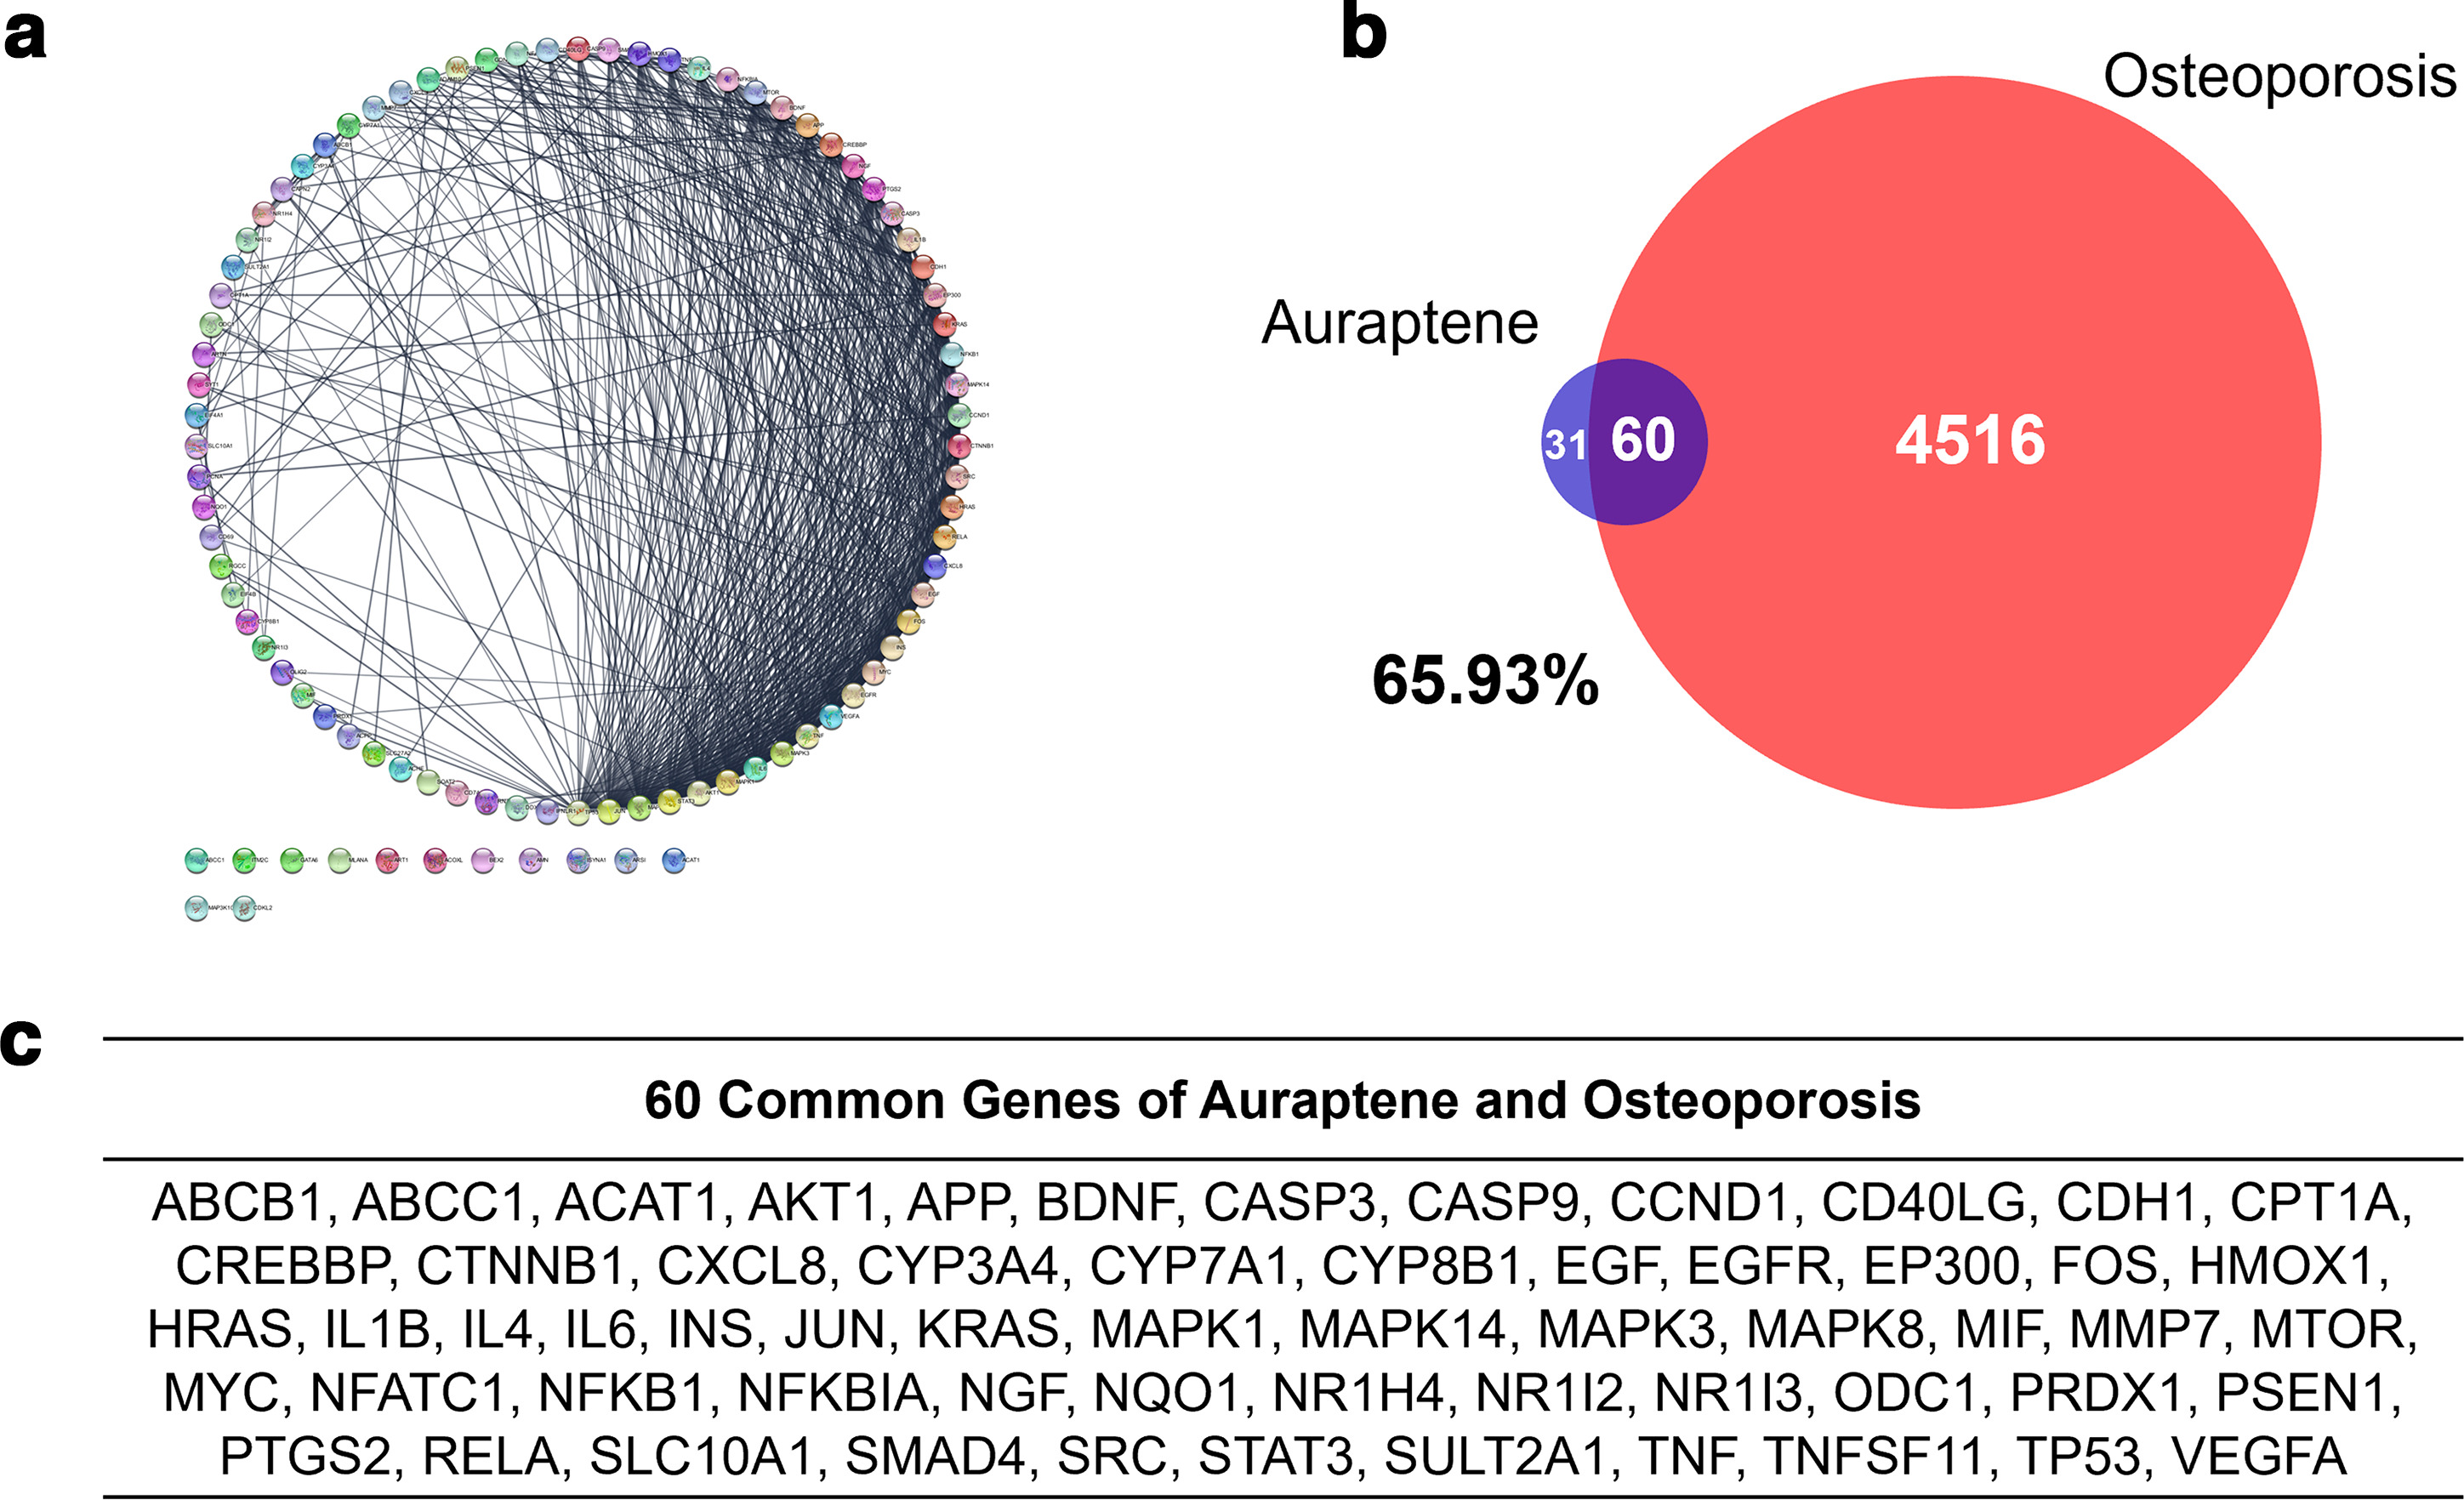 Fig. 1 
            a) Network of auraptene (AUR) with 91 nodes and 630 edges. b) Venn diagram of intersection targets between AUR network and the gene sets of osteoporosis disease. c) Common genes of AUR and osteoporosis.
          